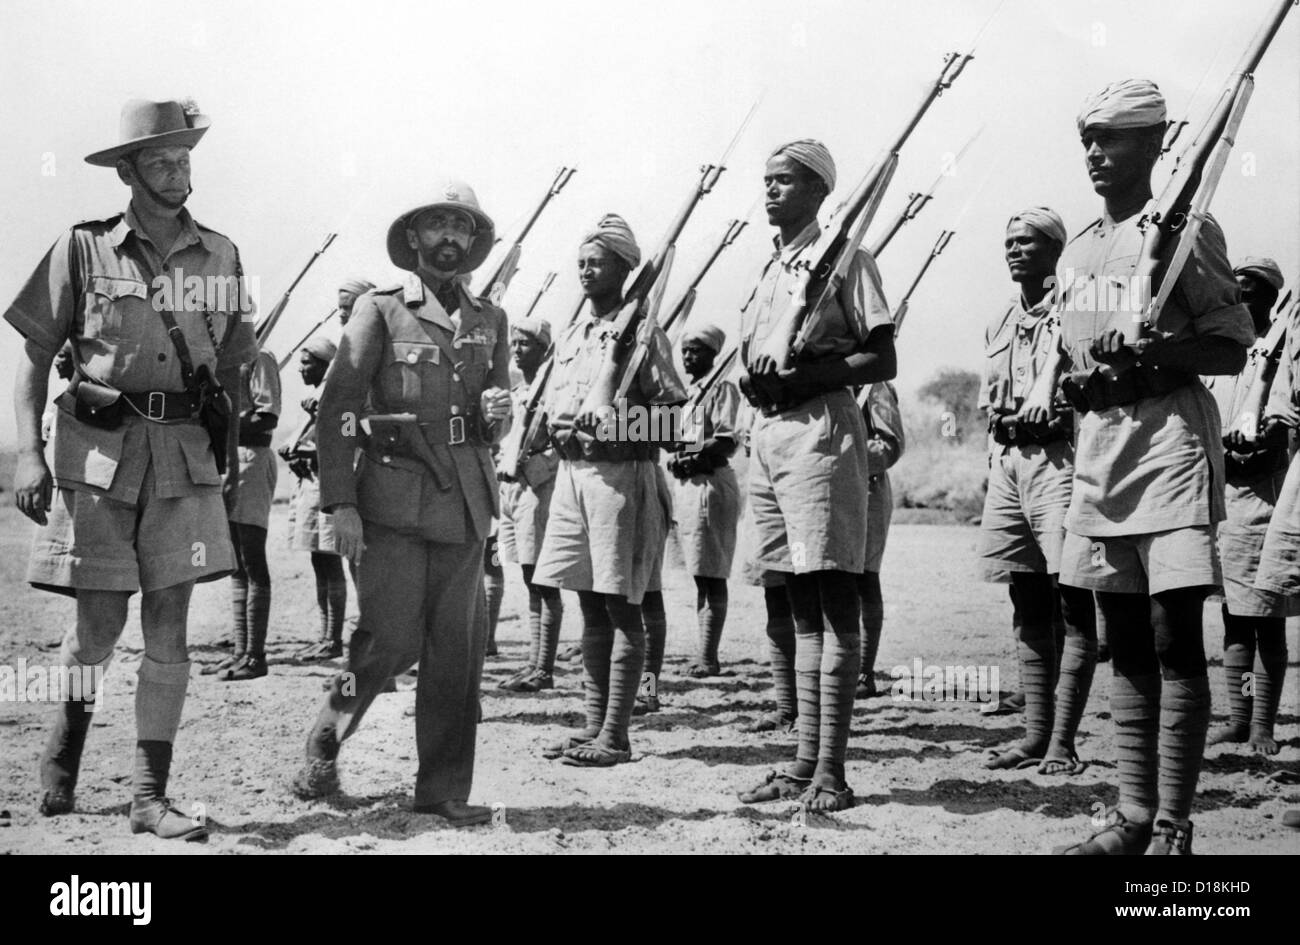 Deposed Ethiopian leader, Haile Selassie inspecting Ethiopians soldiers fighting with the British in Egypt. March 10, 1941. Stock Photo